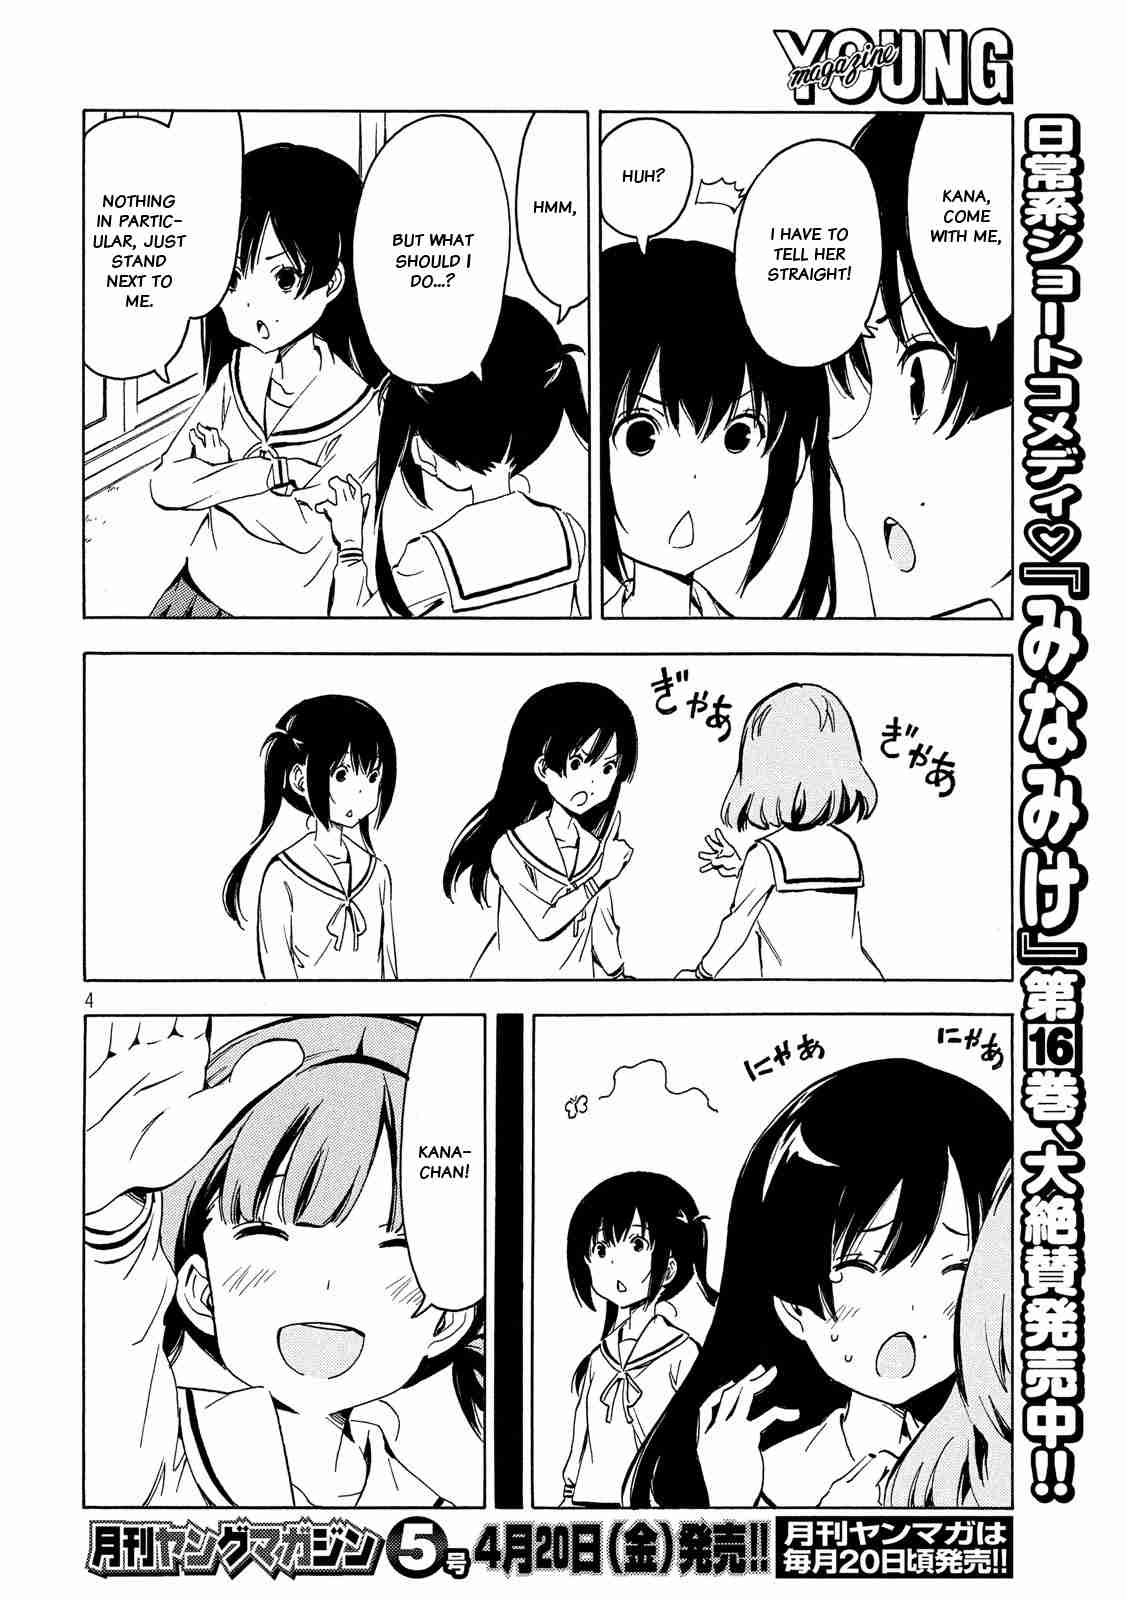 Minami ke Ch. 339 Just being there